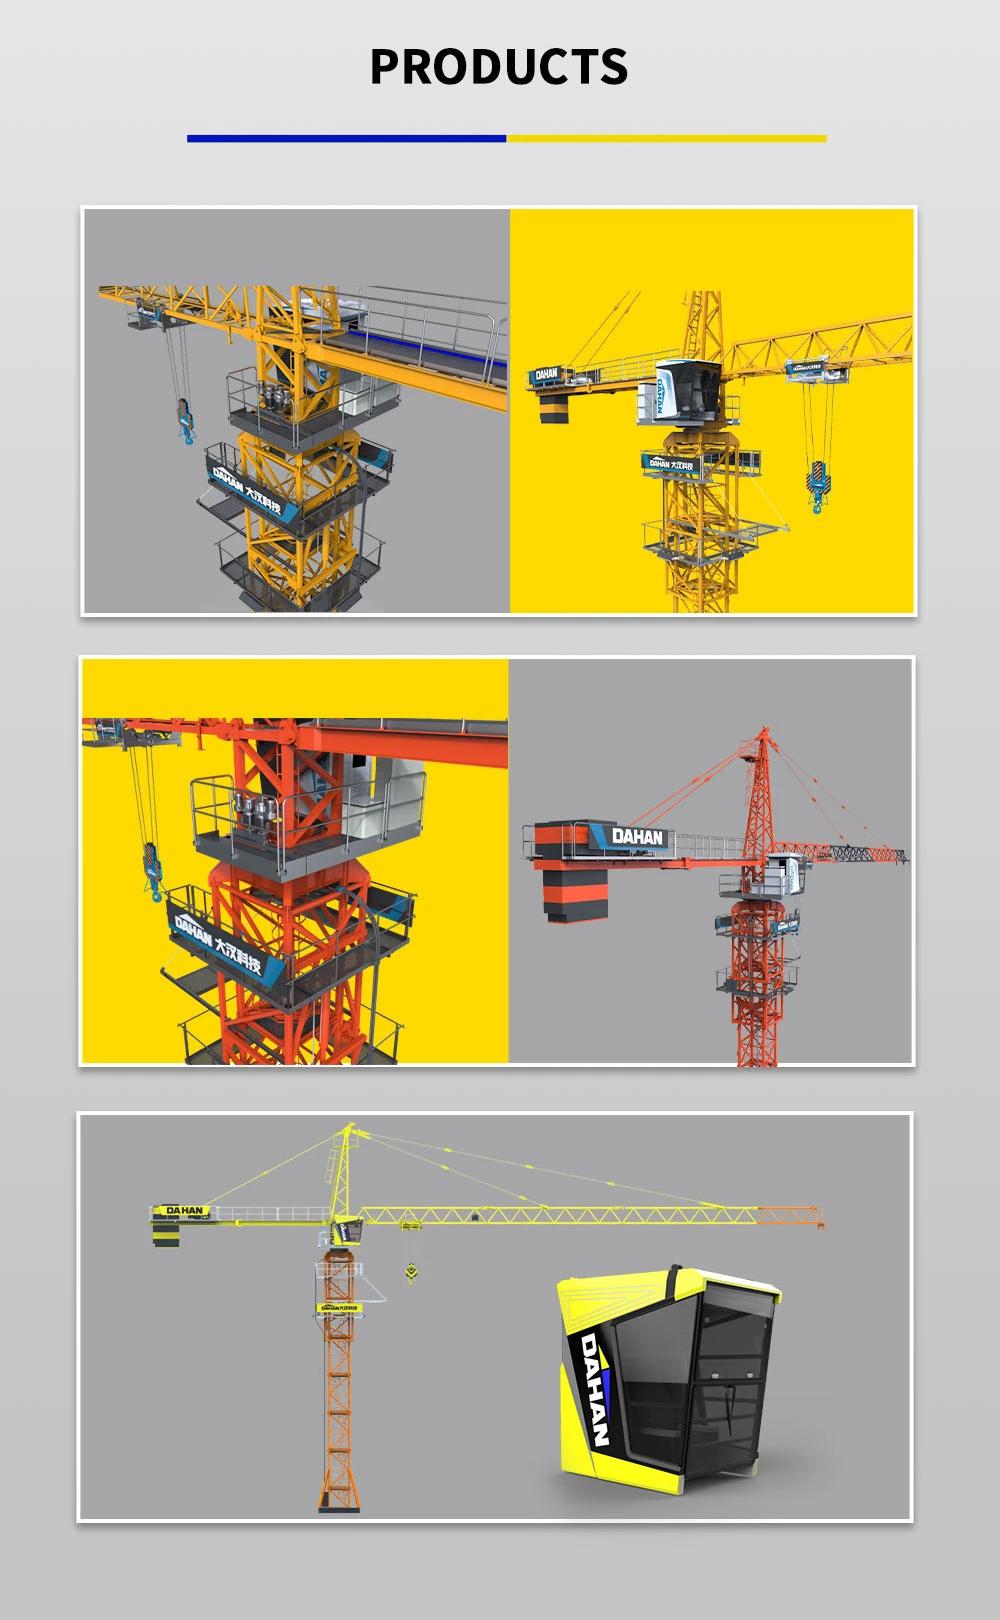 Construction Tower Cranes High-Quality and Affordable Tower Cranes